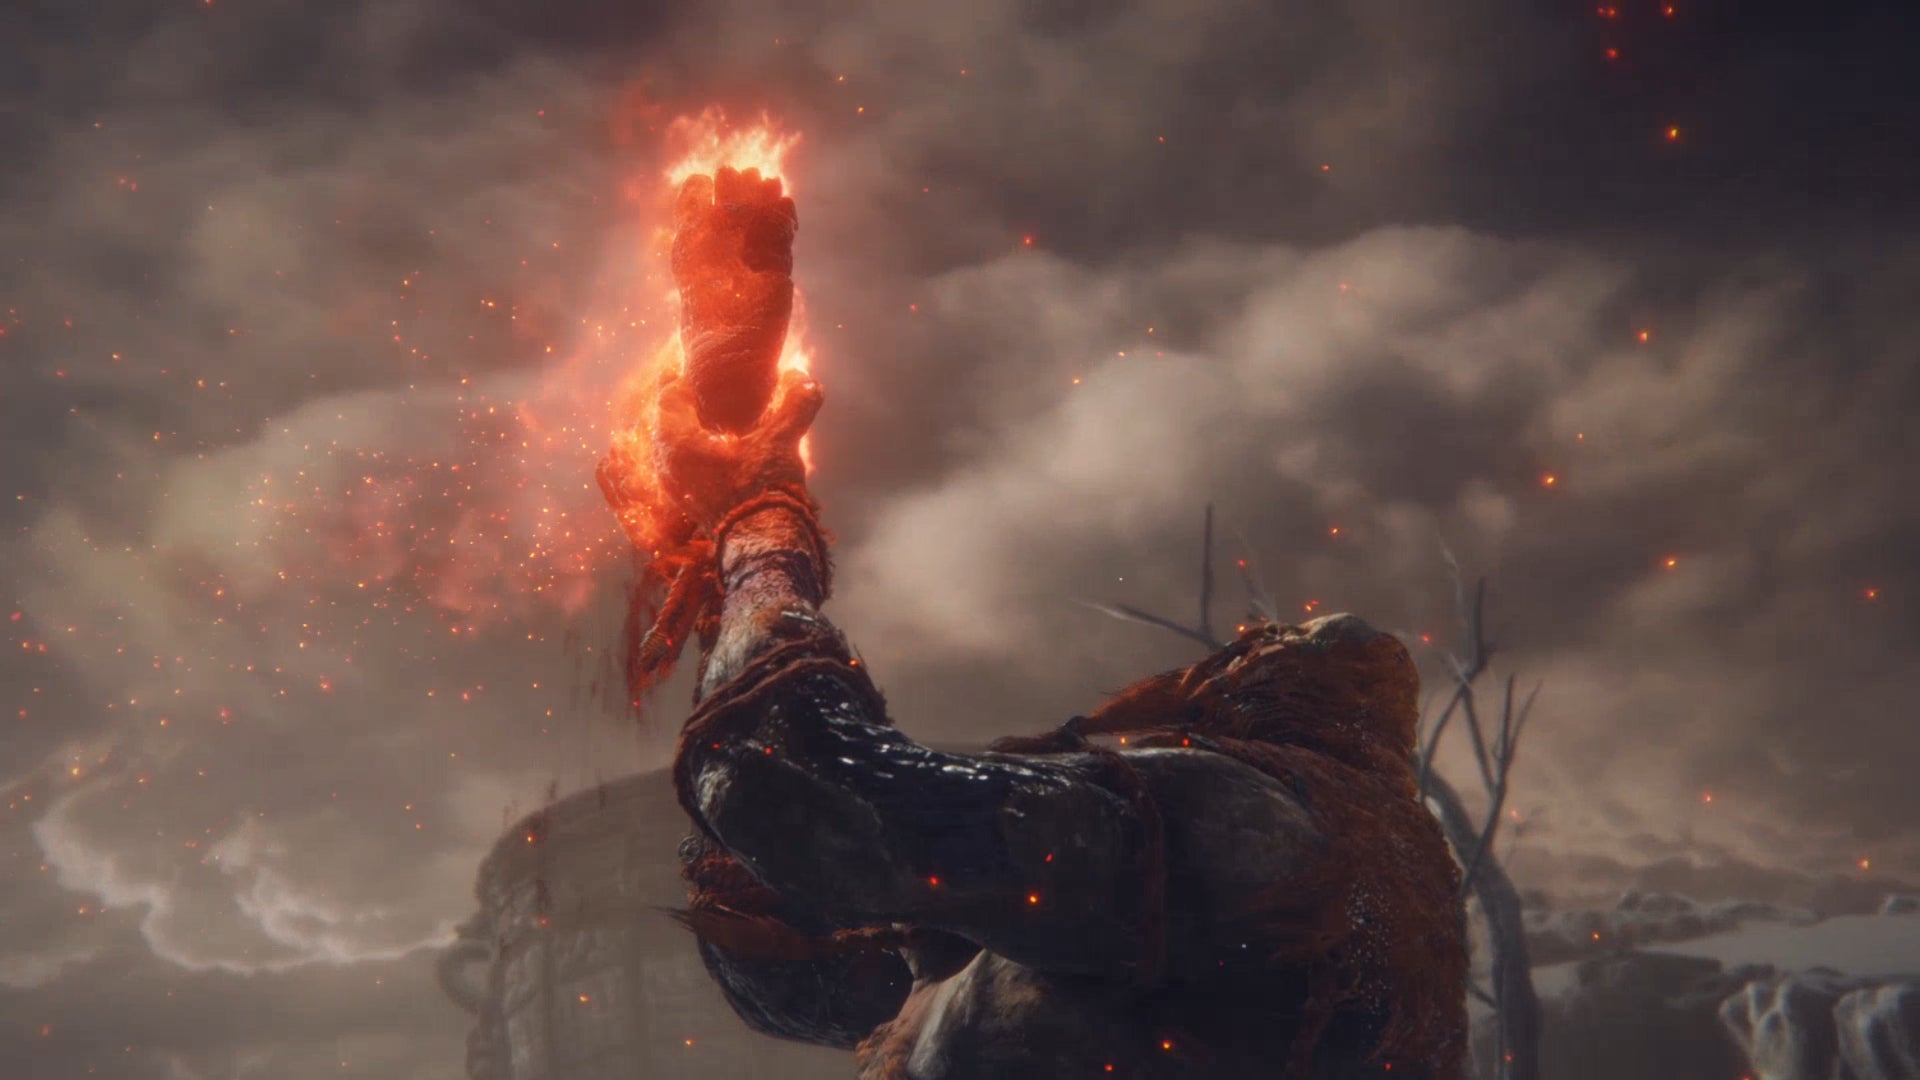 A screenshot from a cutscene in Elden Ring: the Fire Giant raises its own flaming severed leg with a roar.